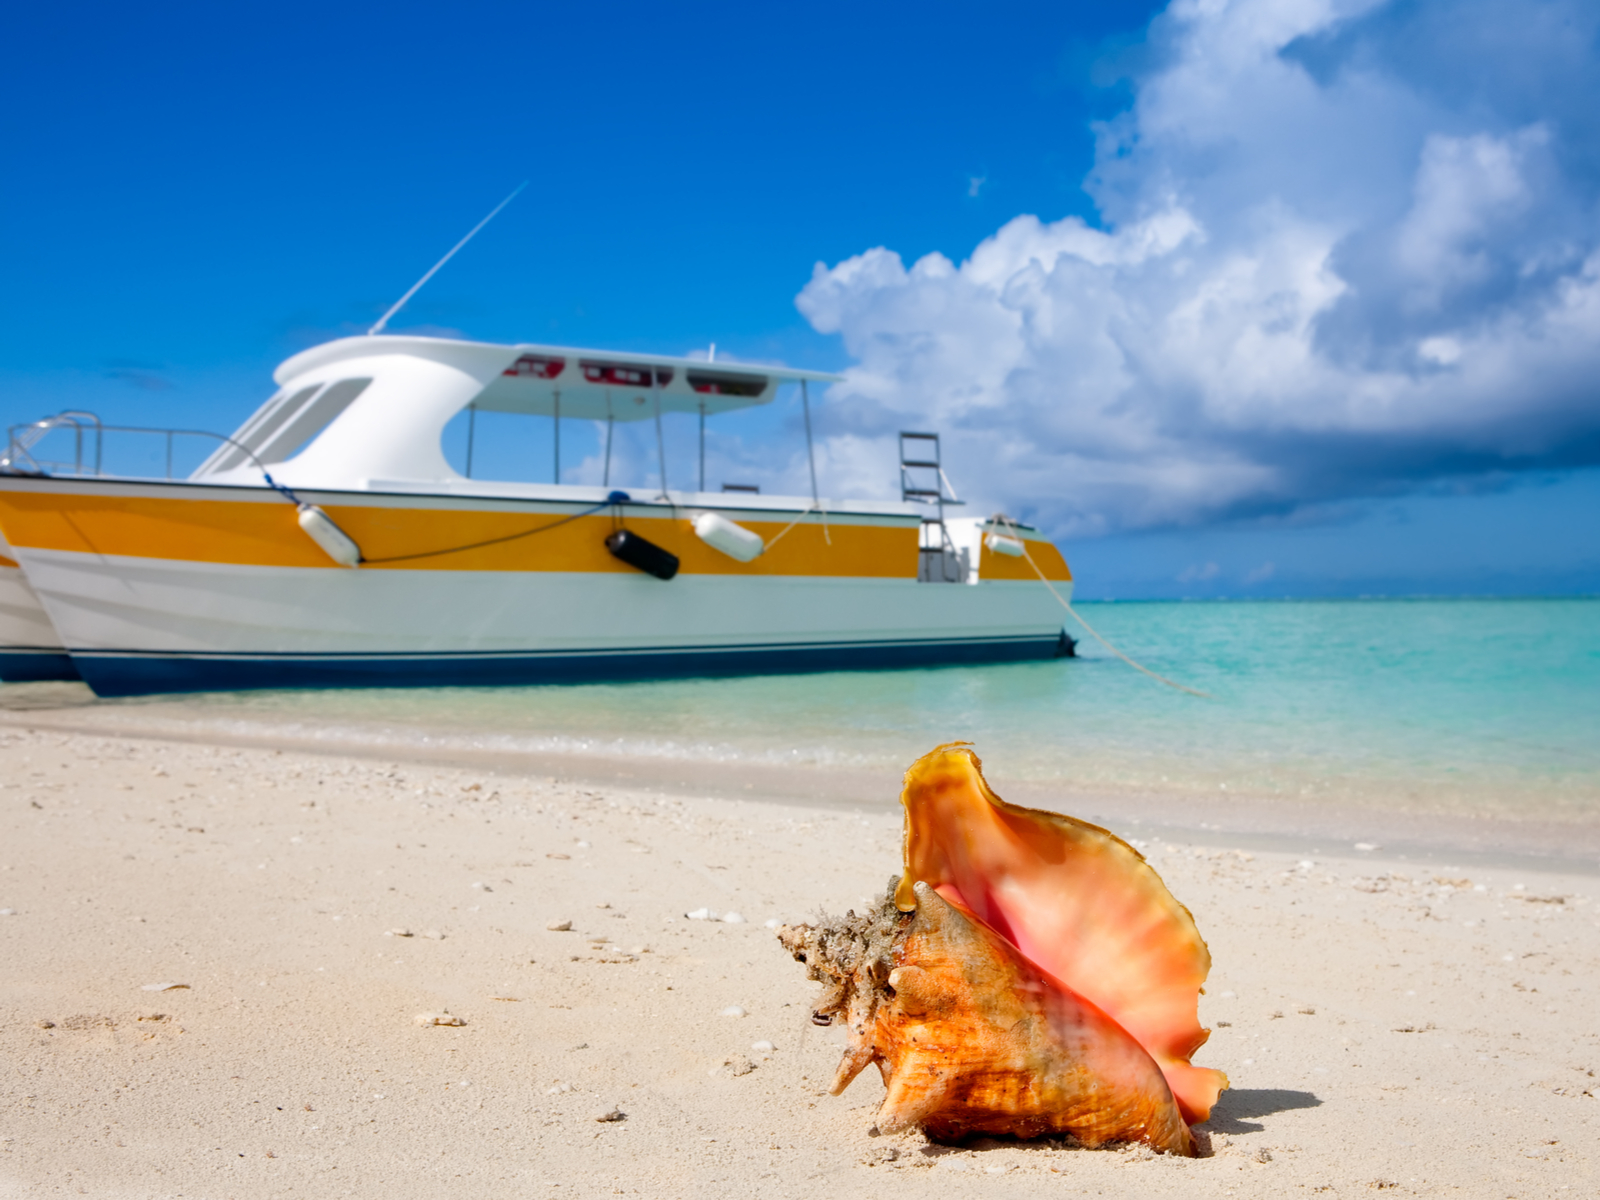 Image of a yellow and white ferry boat on the beach next to a Conch Shell during the best time to visit Turks and Caicos